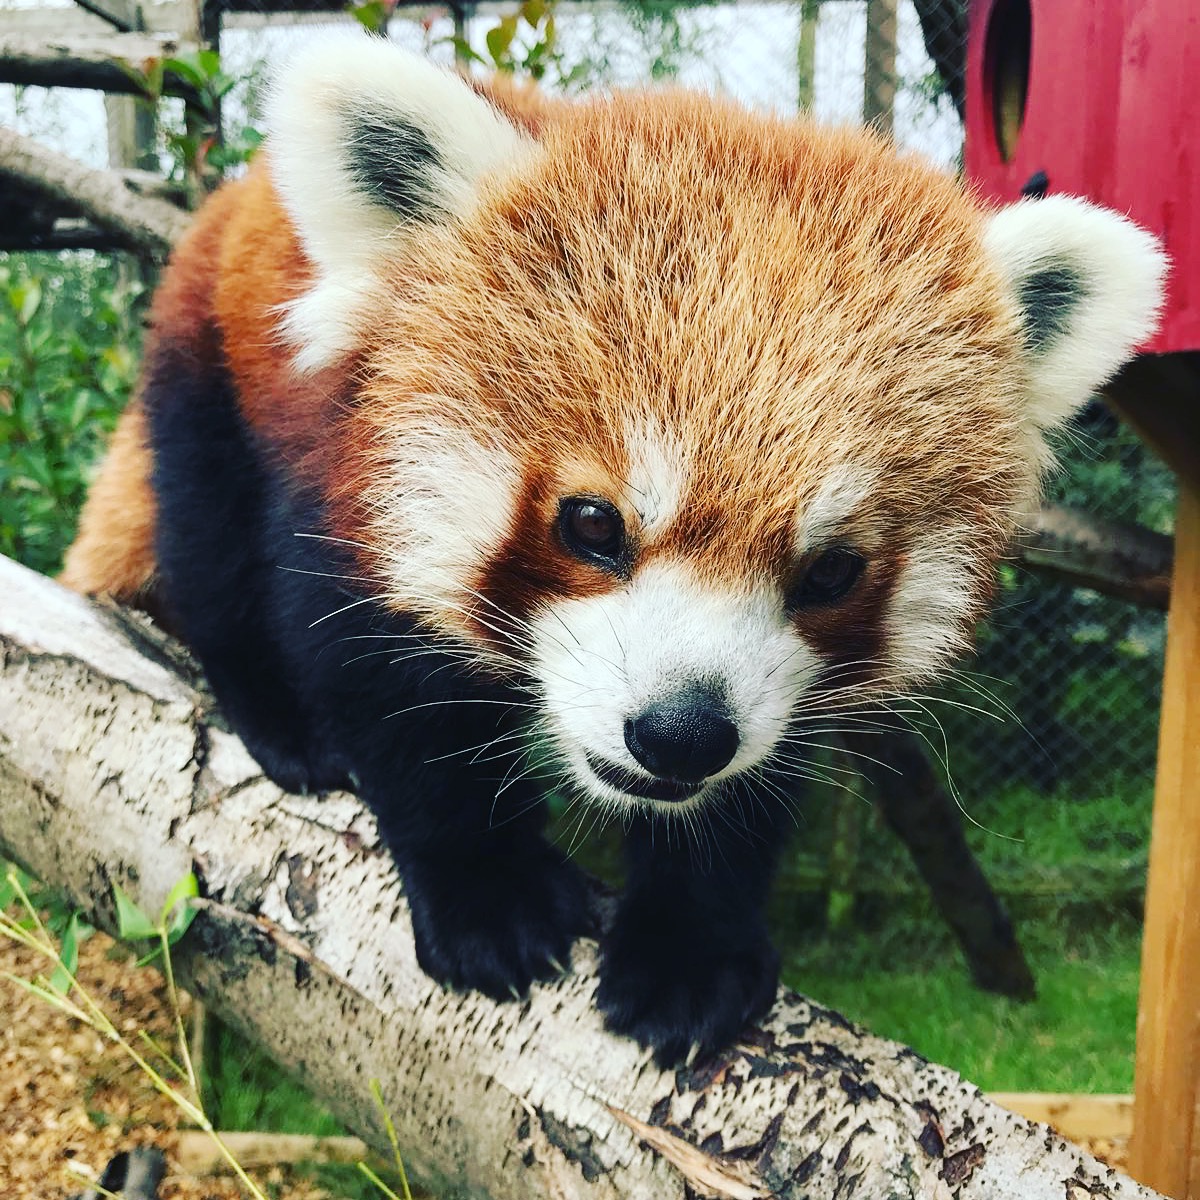 Image showing a red panda's face close up